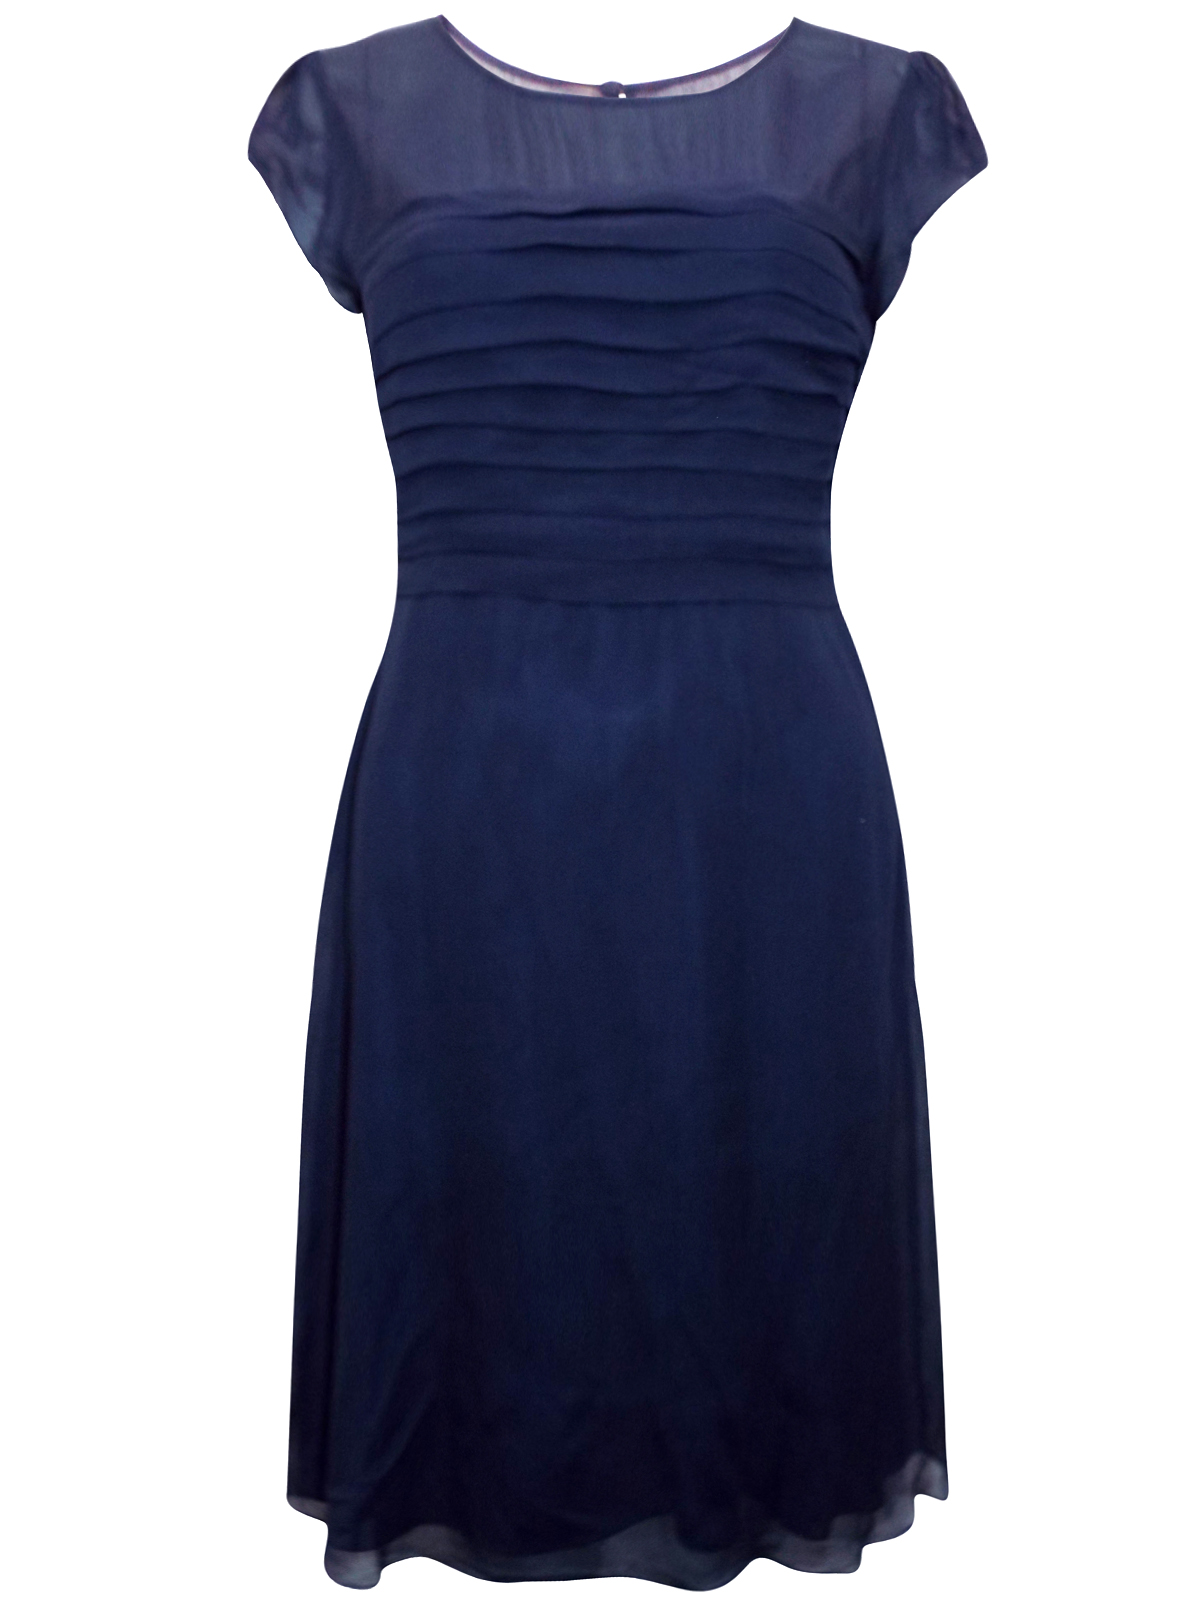 BOD3N NAVY EVELINA Pleated Cap Sleeve Fit & Flare Dress - Size 10 to 16